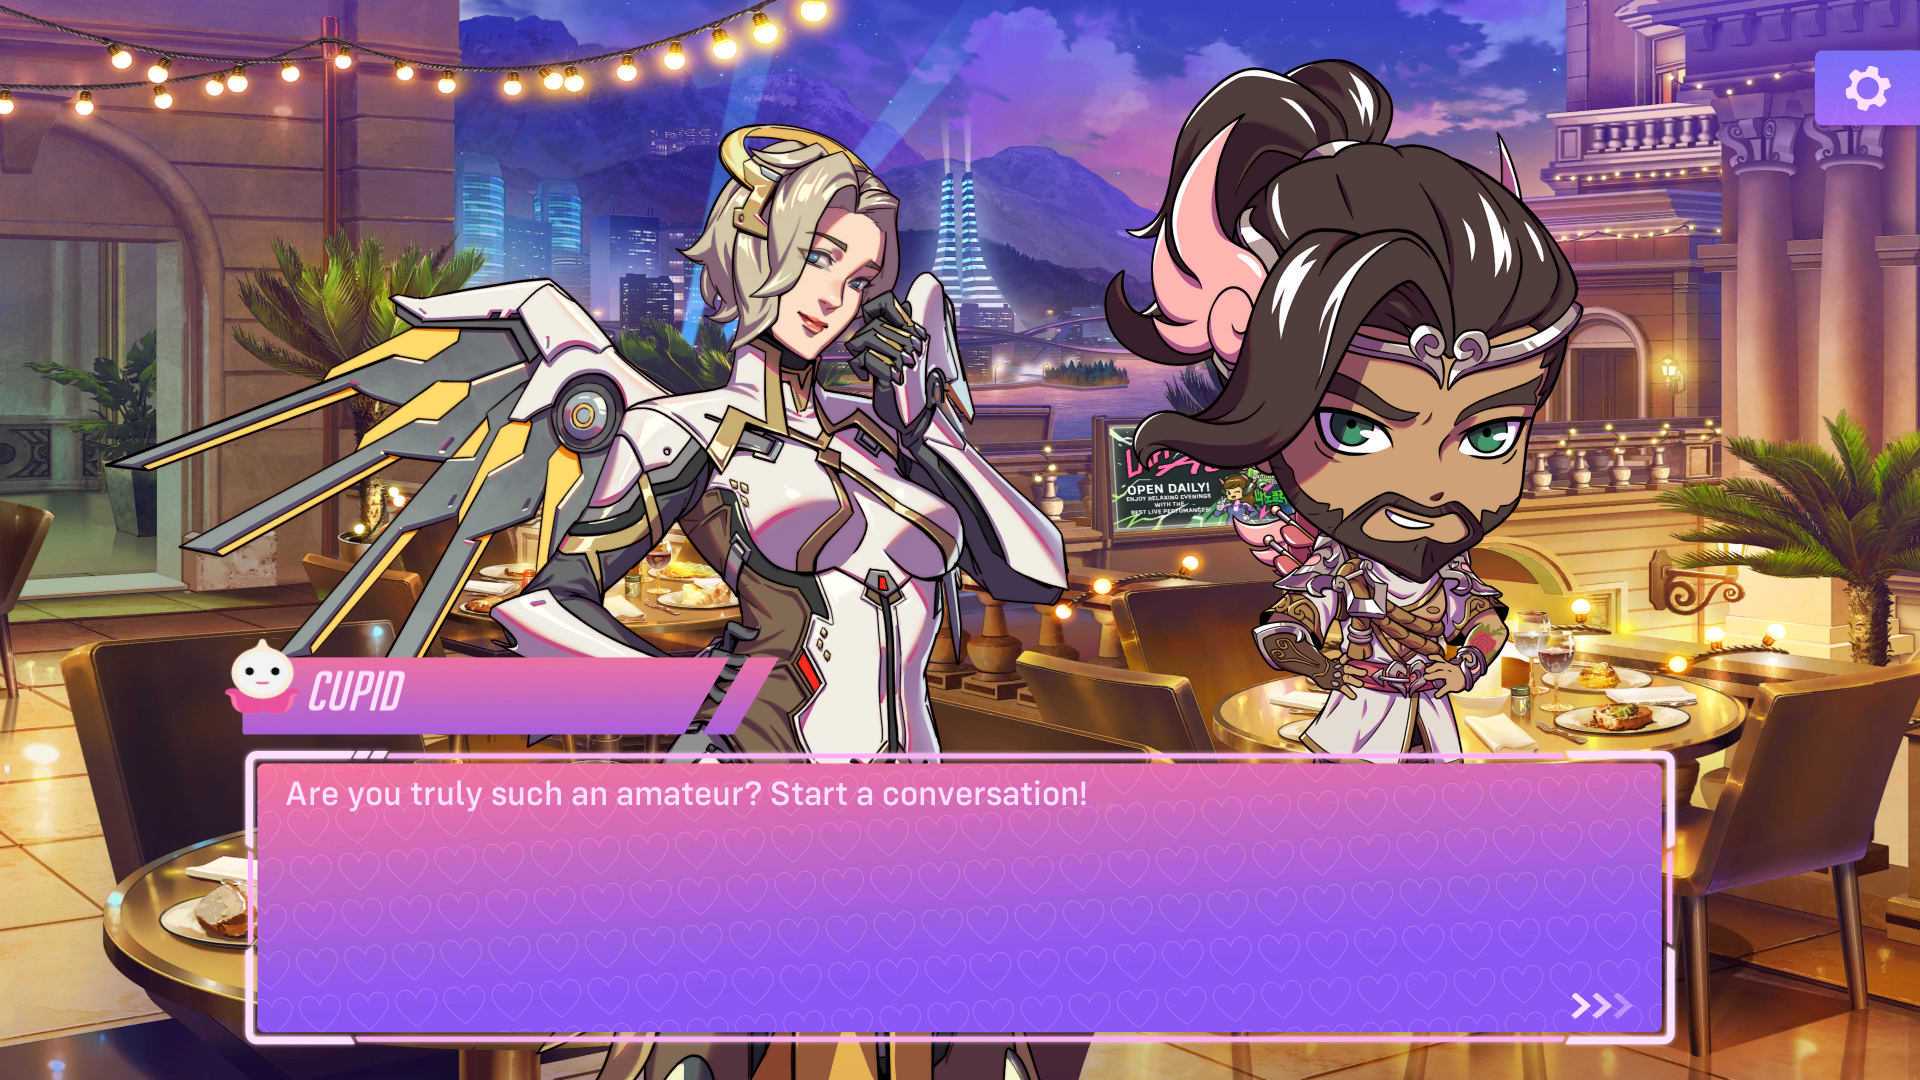 Overwatch dating sim - Mercy and Cupid dialogue on a date